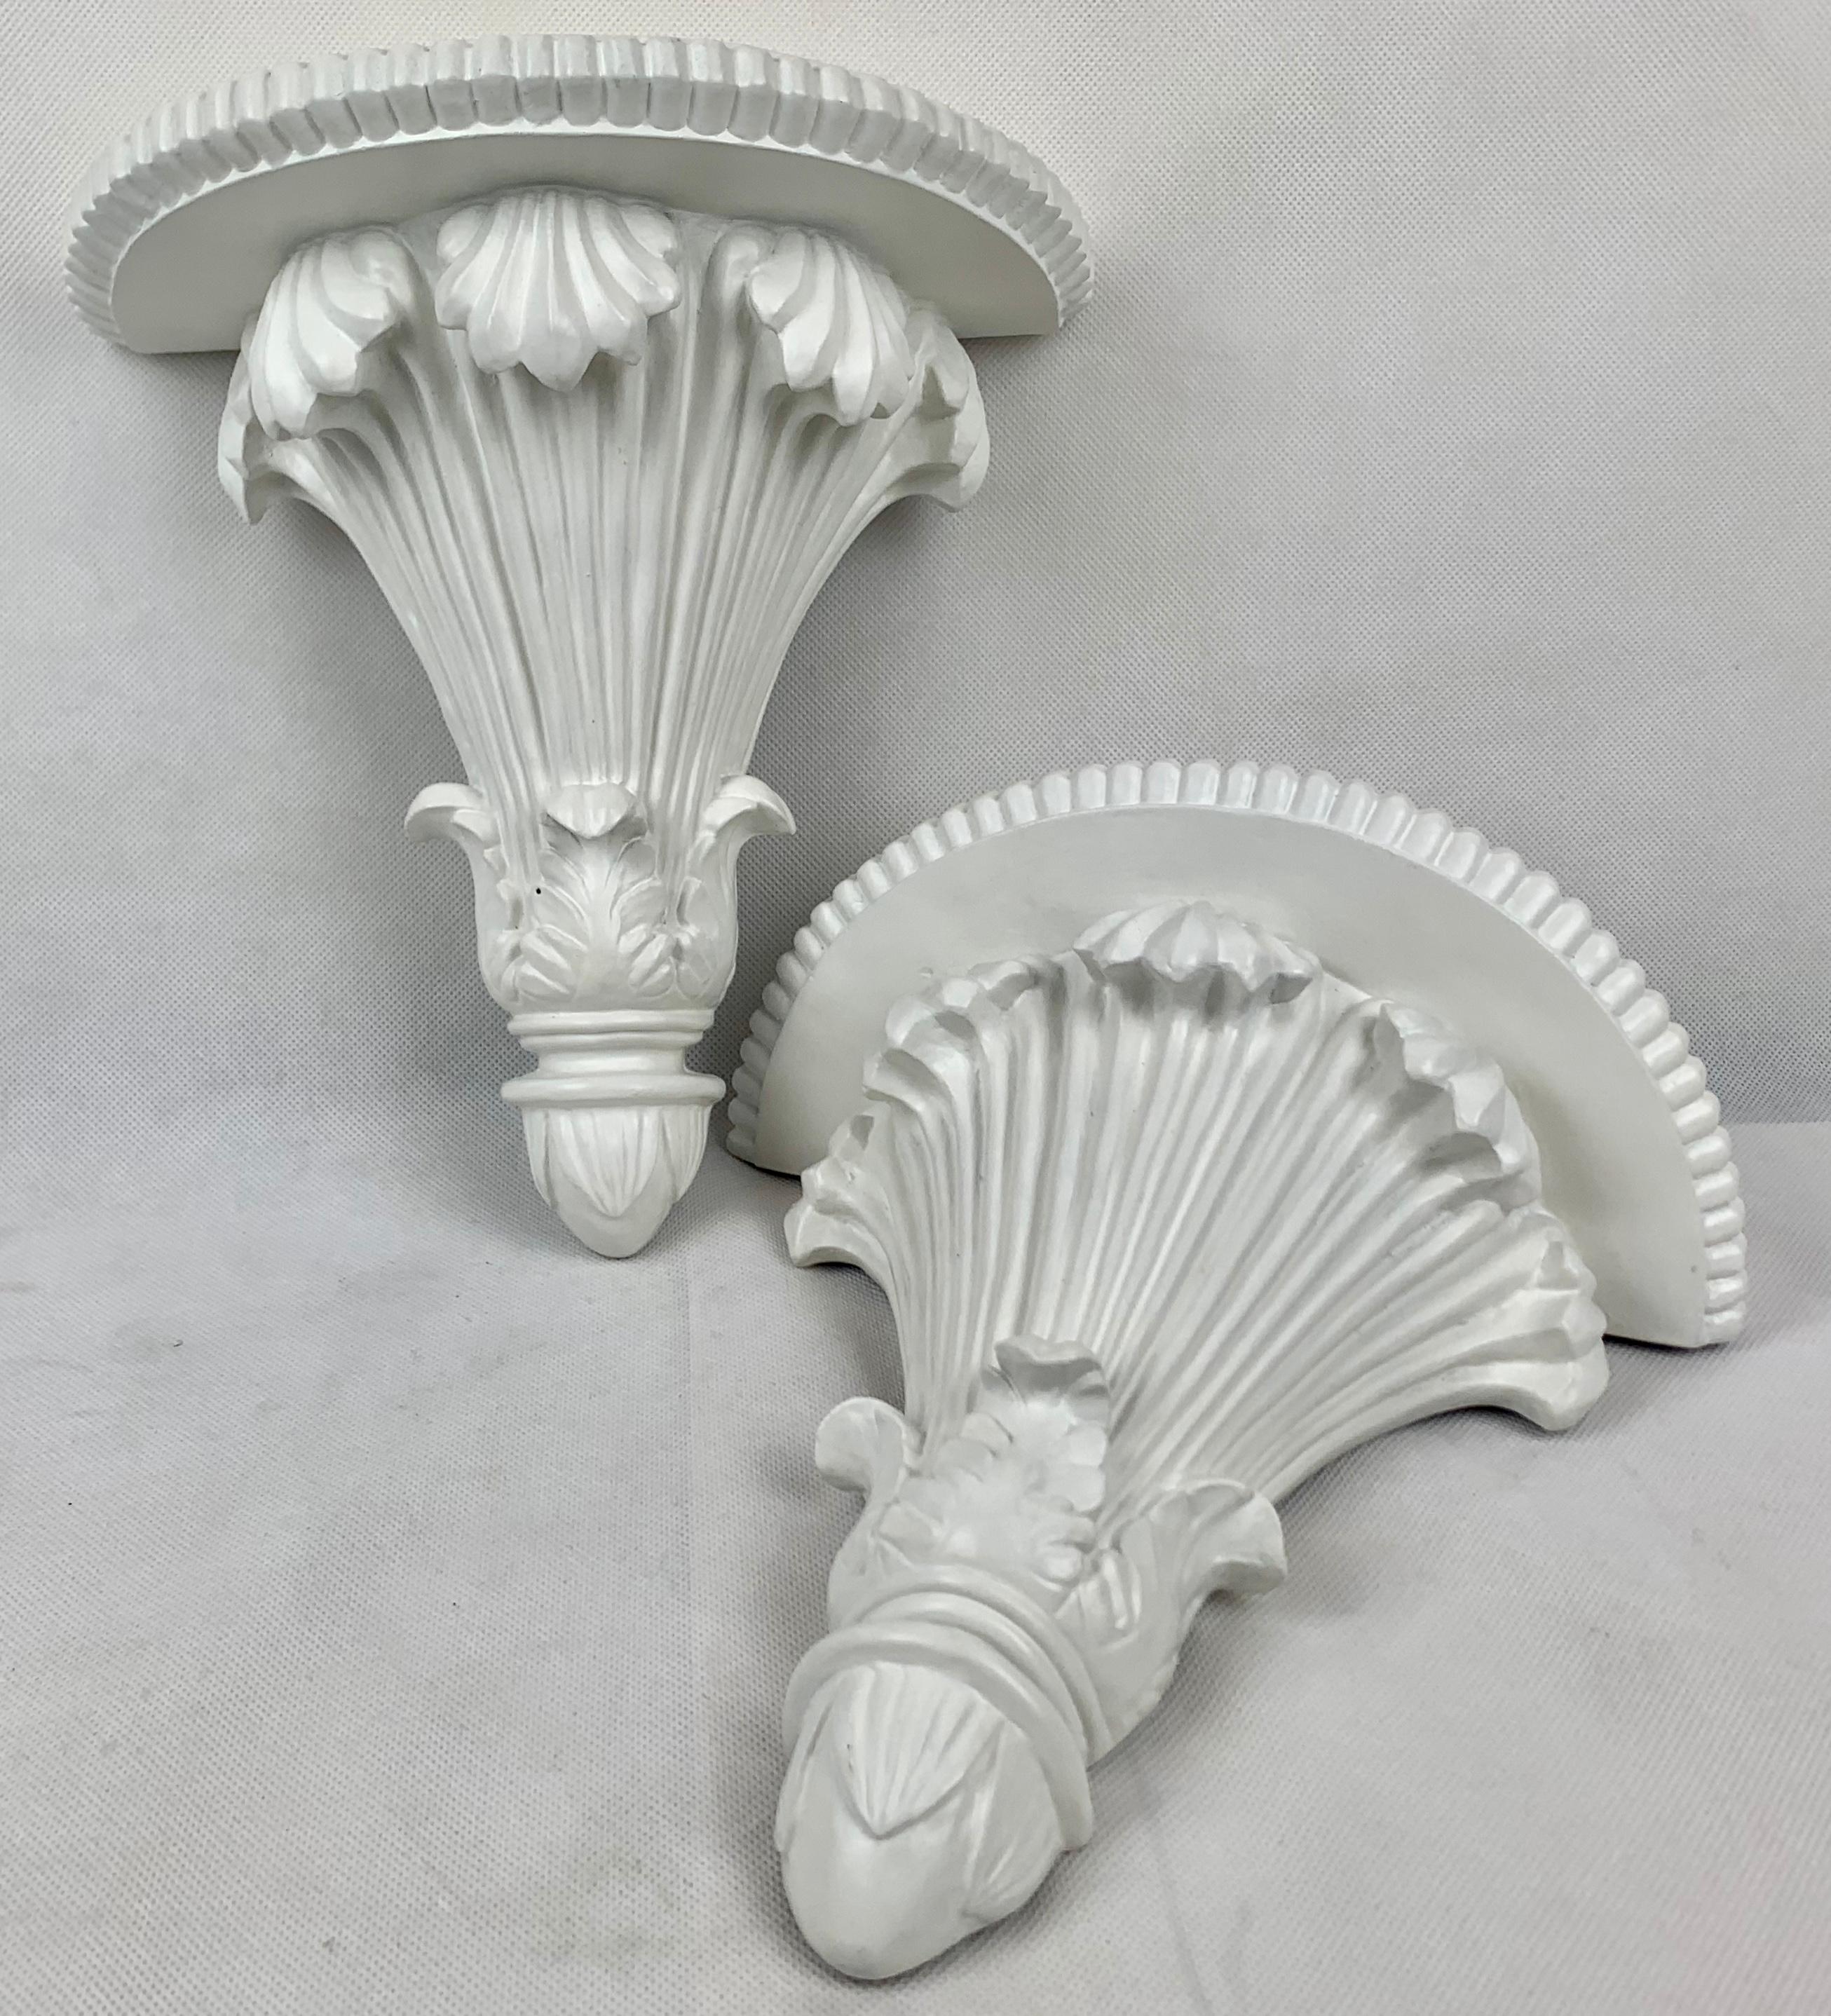 Pair of white neo-classical wall brackets. The half round top shelves have a fluted edge. The body of the bracket has shell forms at the top and acanthus leaves at the base, all references to neo-classicism.
Mid twentieth century.
Measures: